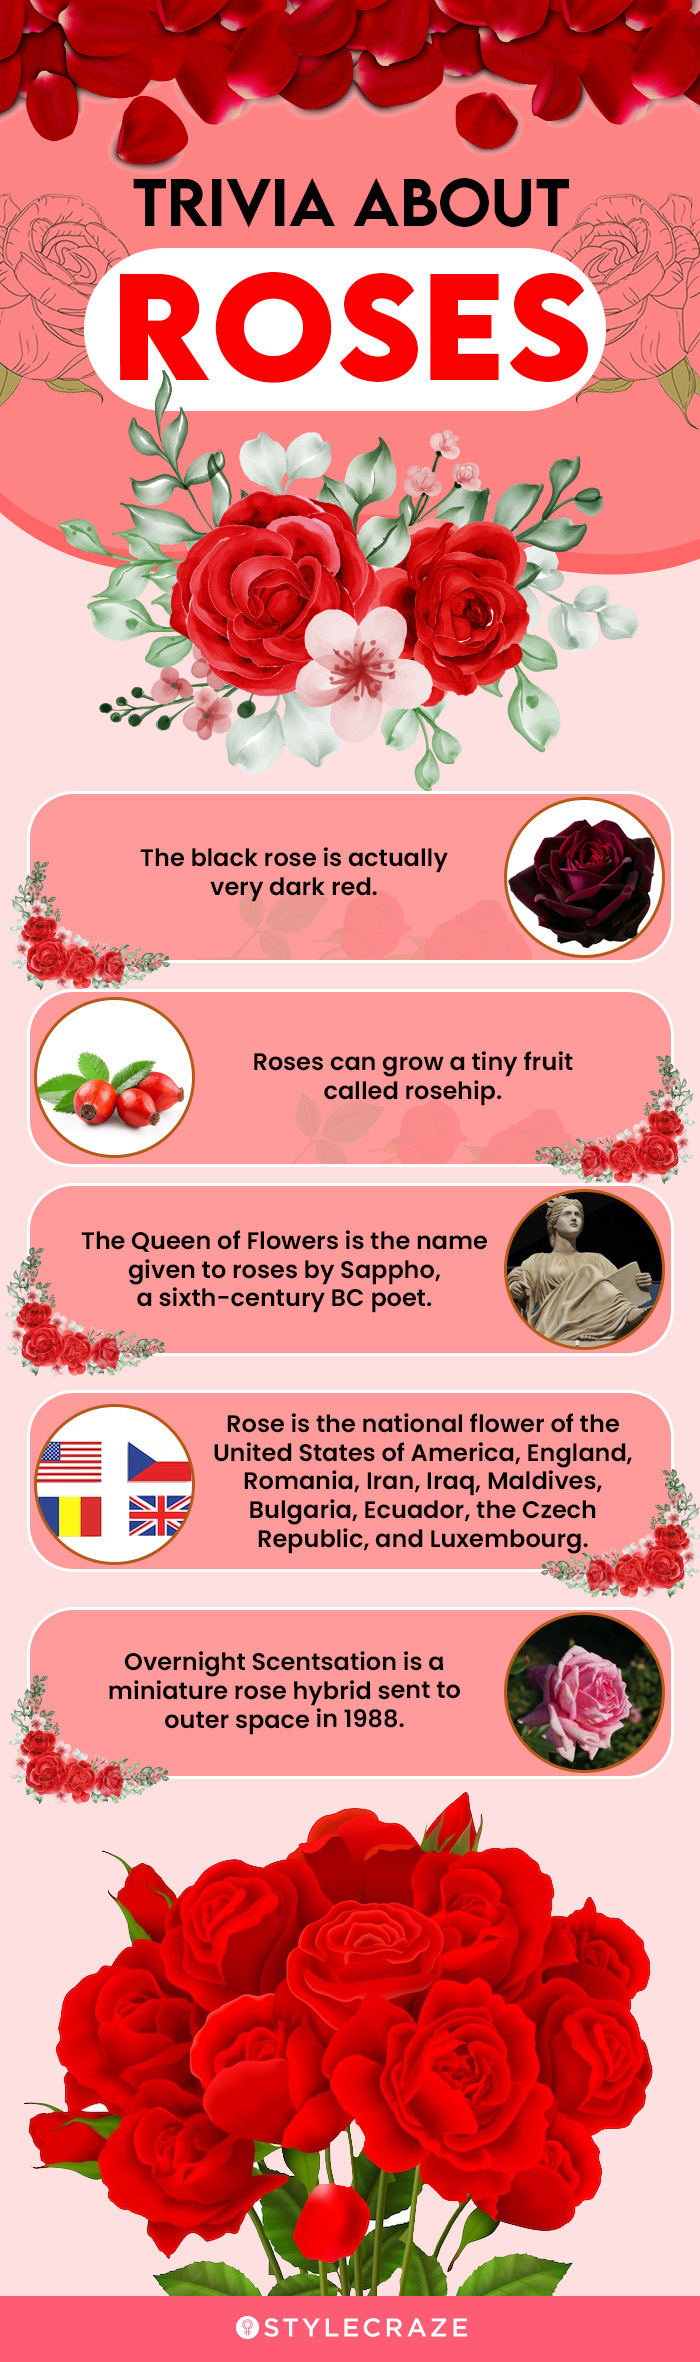 trivia about roses (infographic)